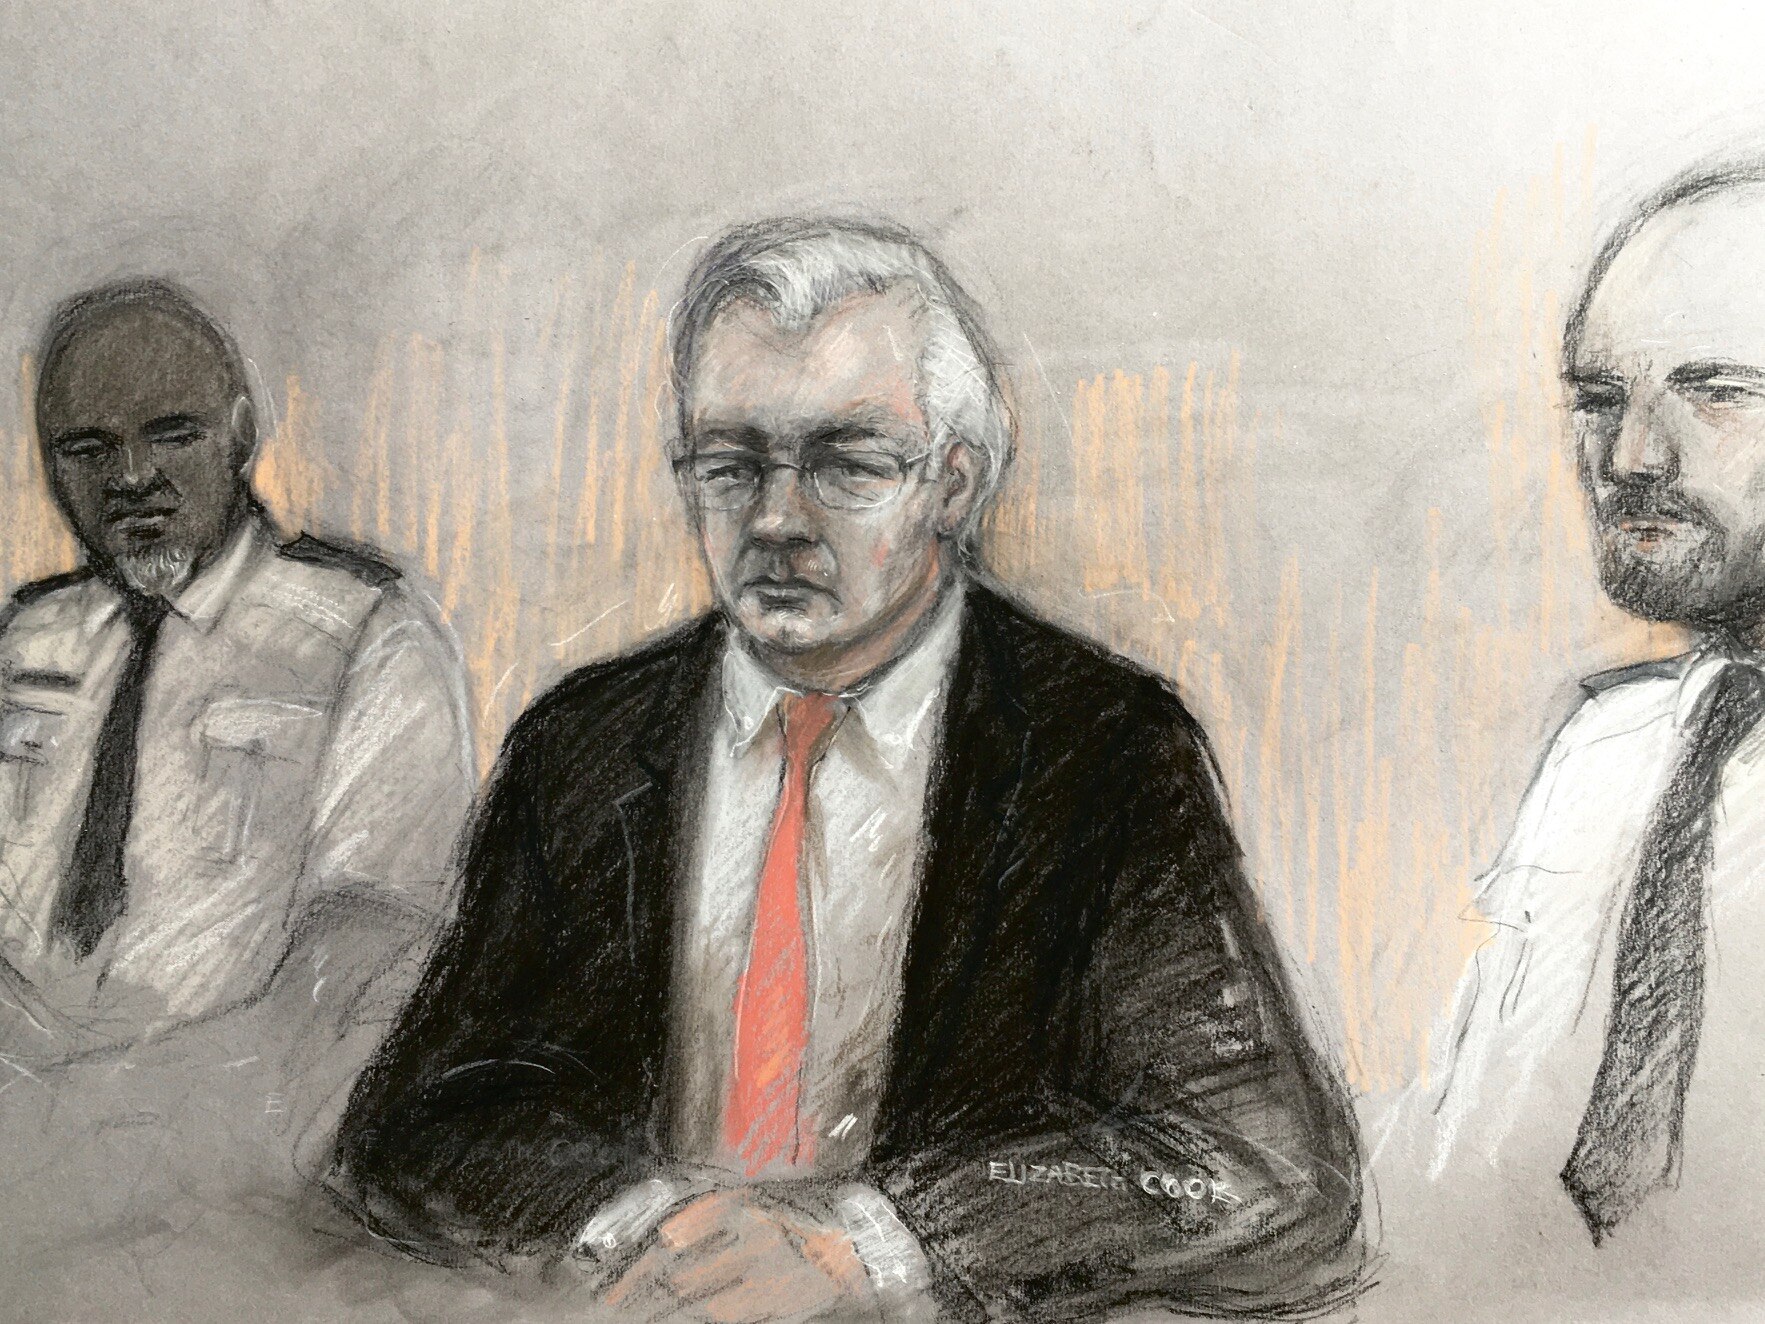 A court artist sketch of Julian Assange appearing at the Old Bailey, London.